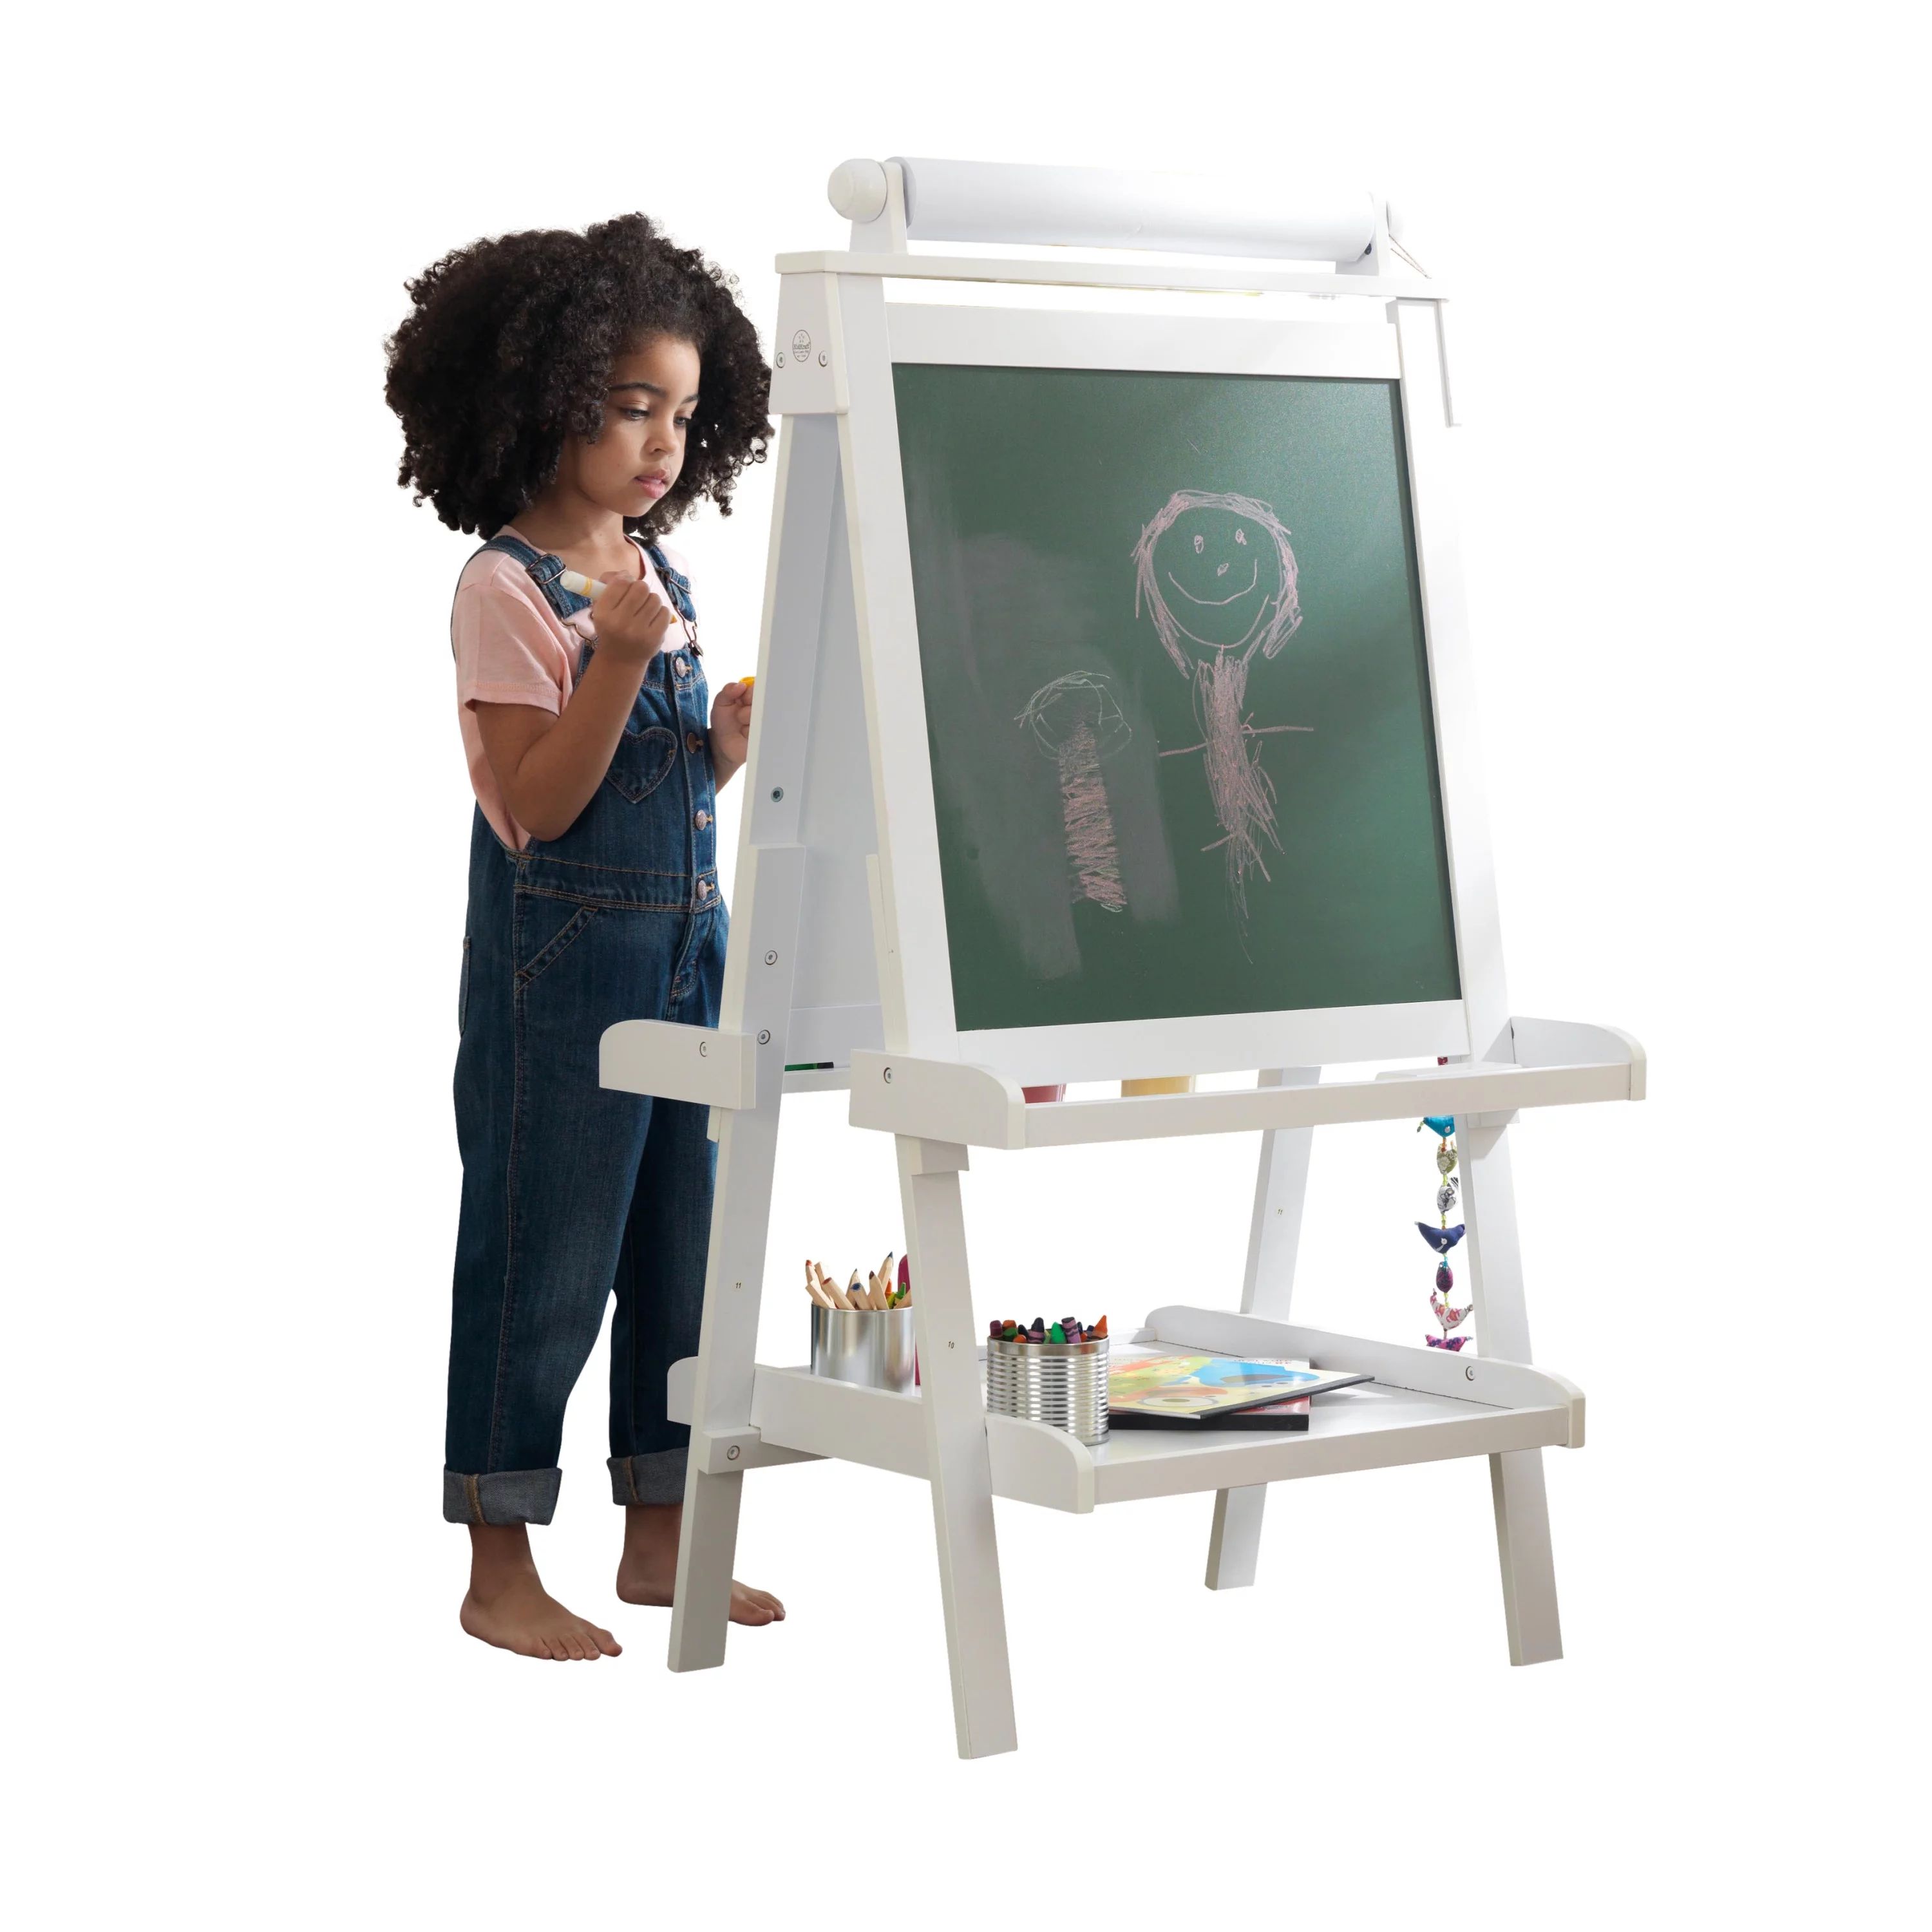 KidKraft Deluxe Wooden Easel with Chalkboard and Dry Erase Surfaces, Paper Roll and Paint Cups - ... | Walmart (US)